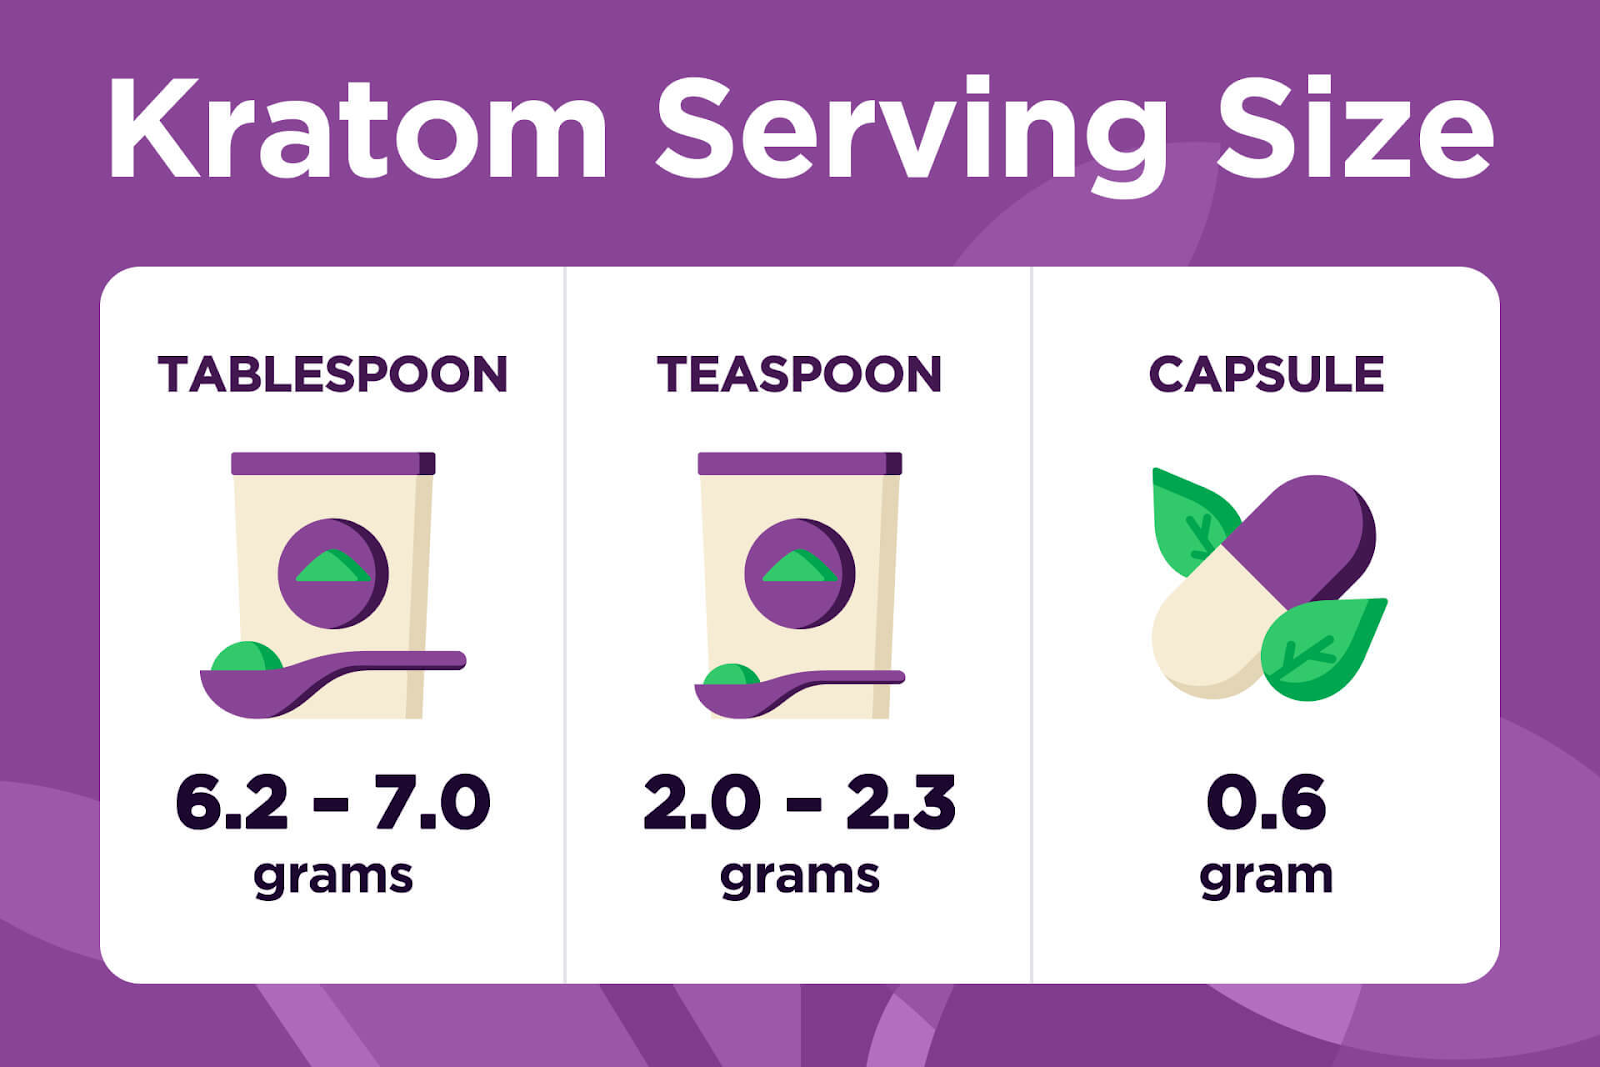 How to Measure Kratom: A Guide to Tablespoon Conversions